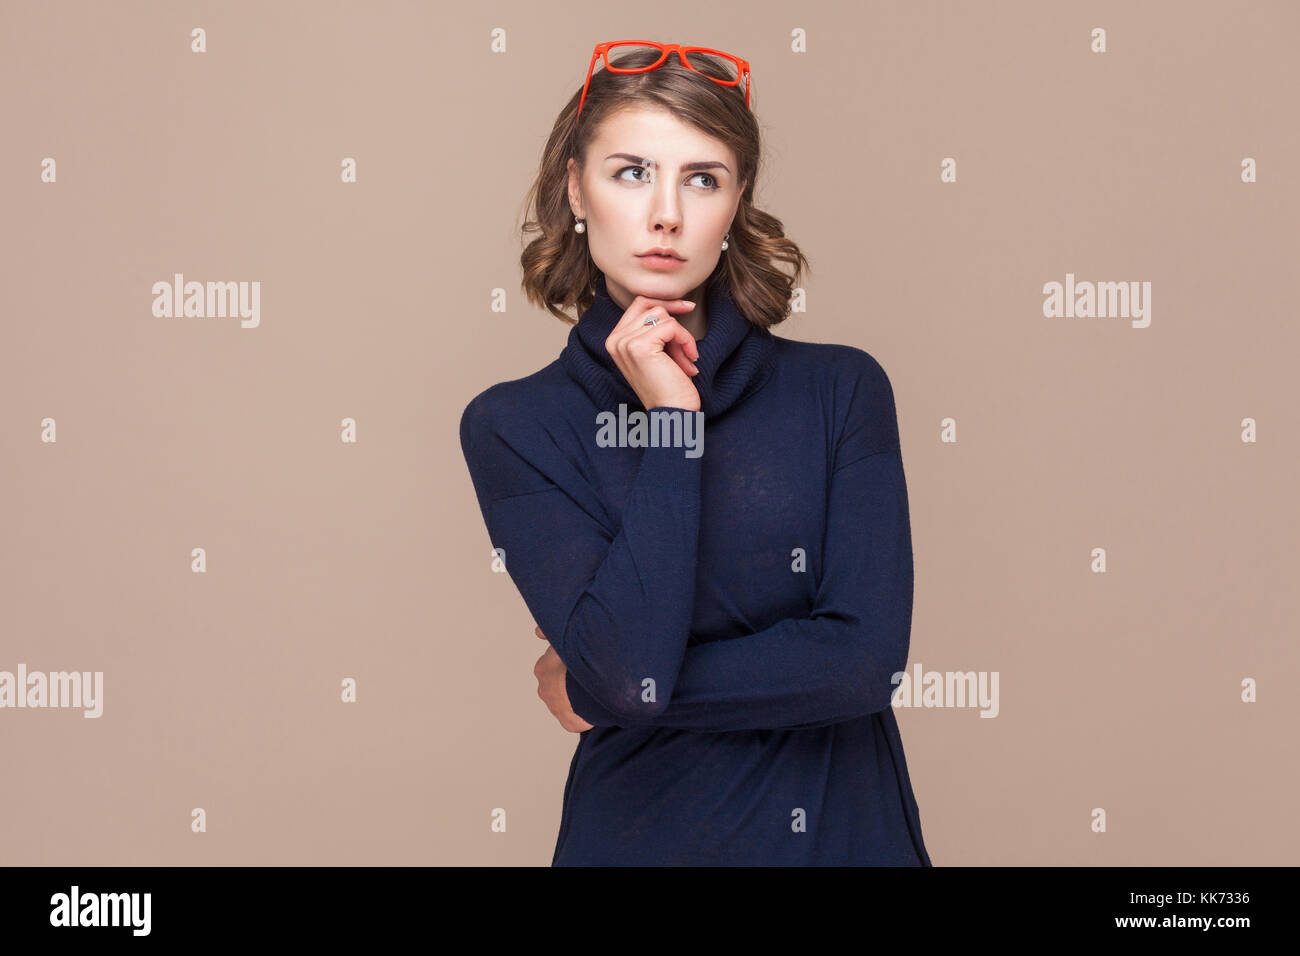 Thoughtful lady pondering and touching chin. Studio shot, light brown background Stock Photo